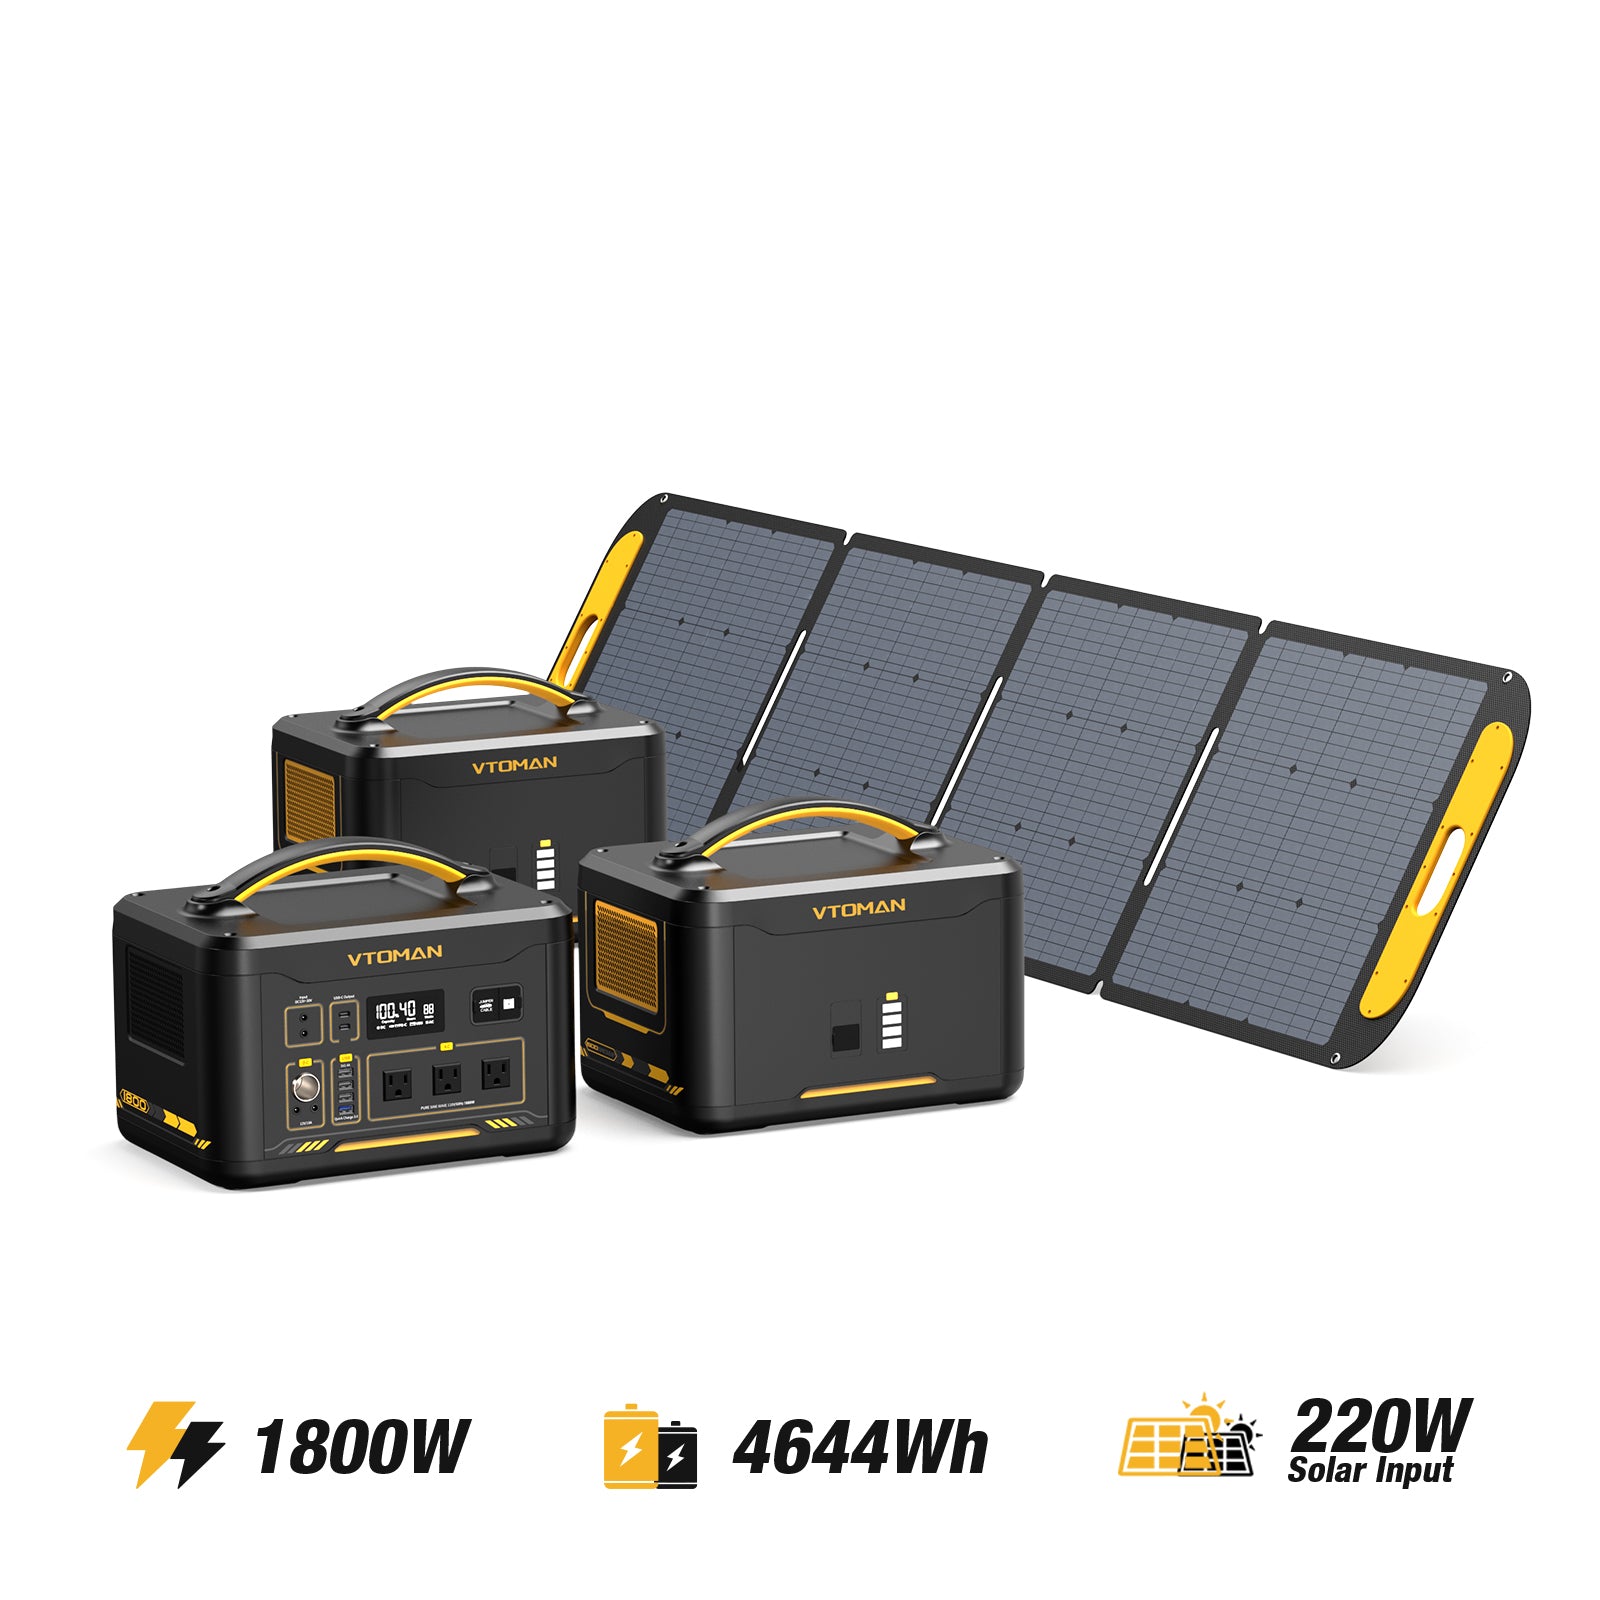 jump1800+2*1548wh extra battery+220w solar panel